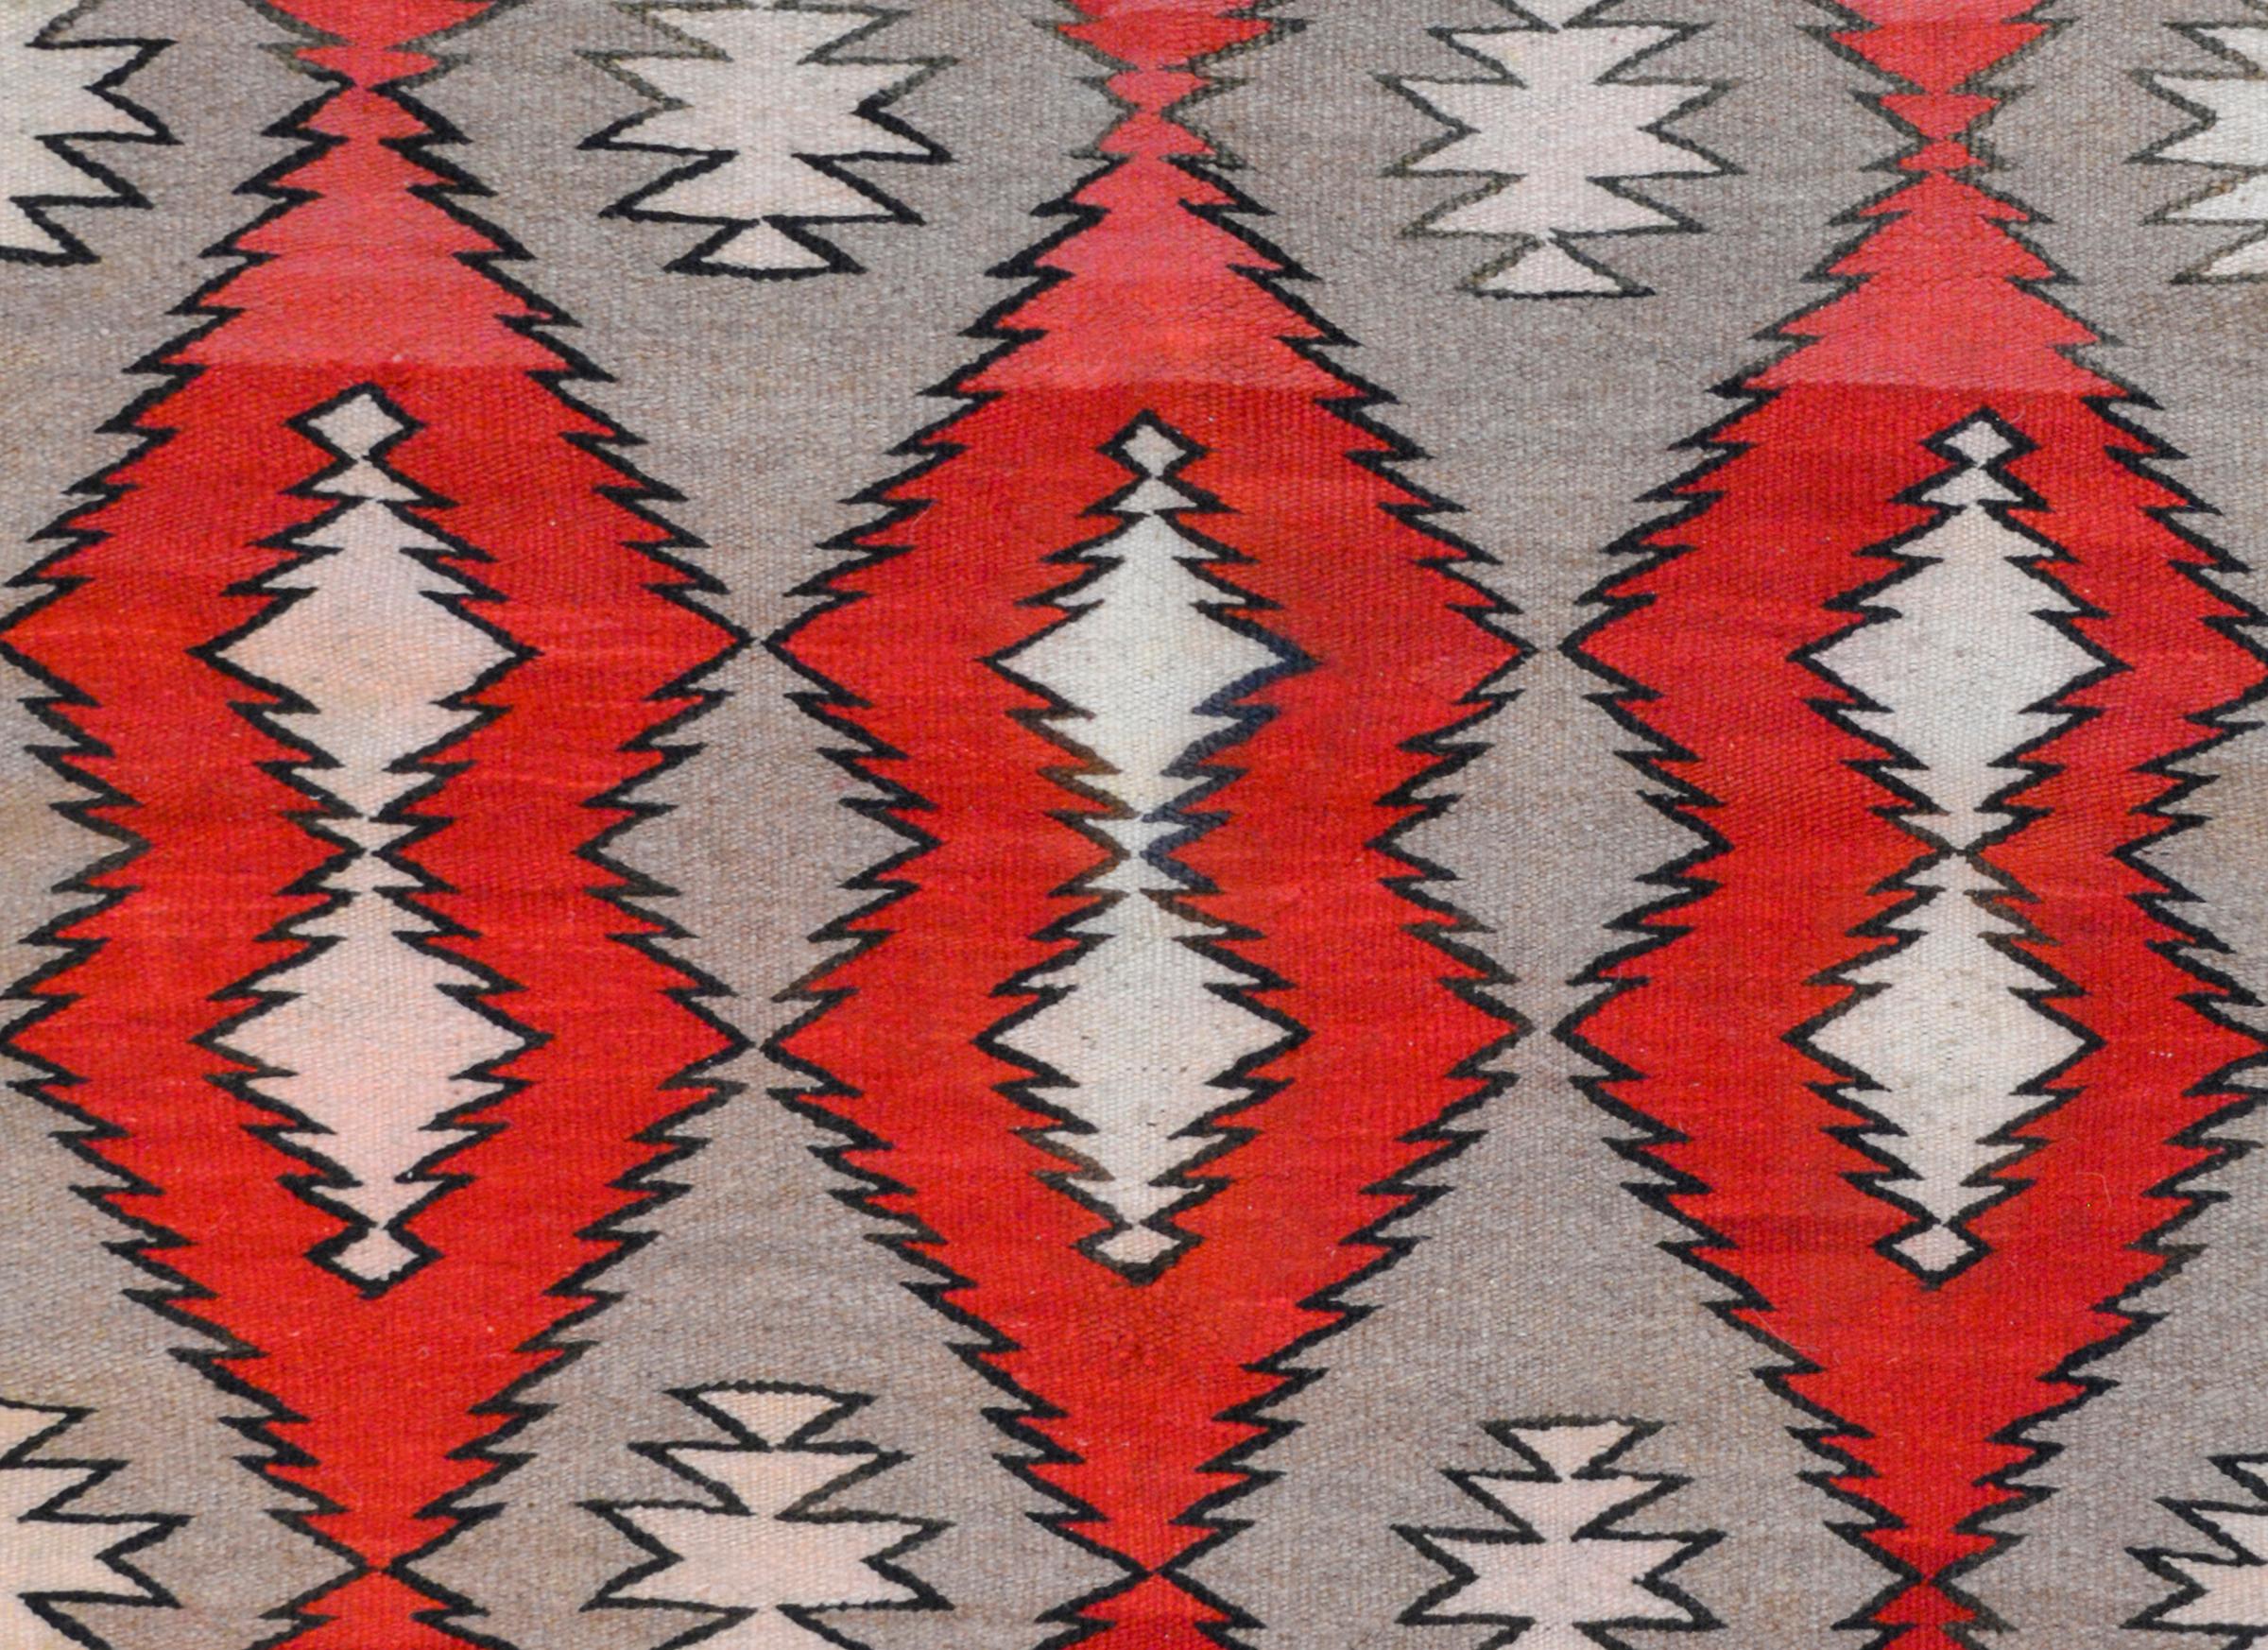 Vegetable Dyed Mesmerizing Early 20th Century Navajo Rug